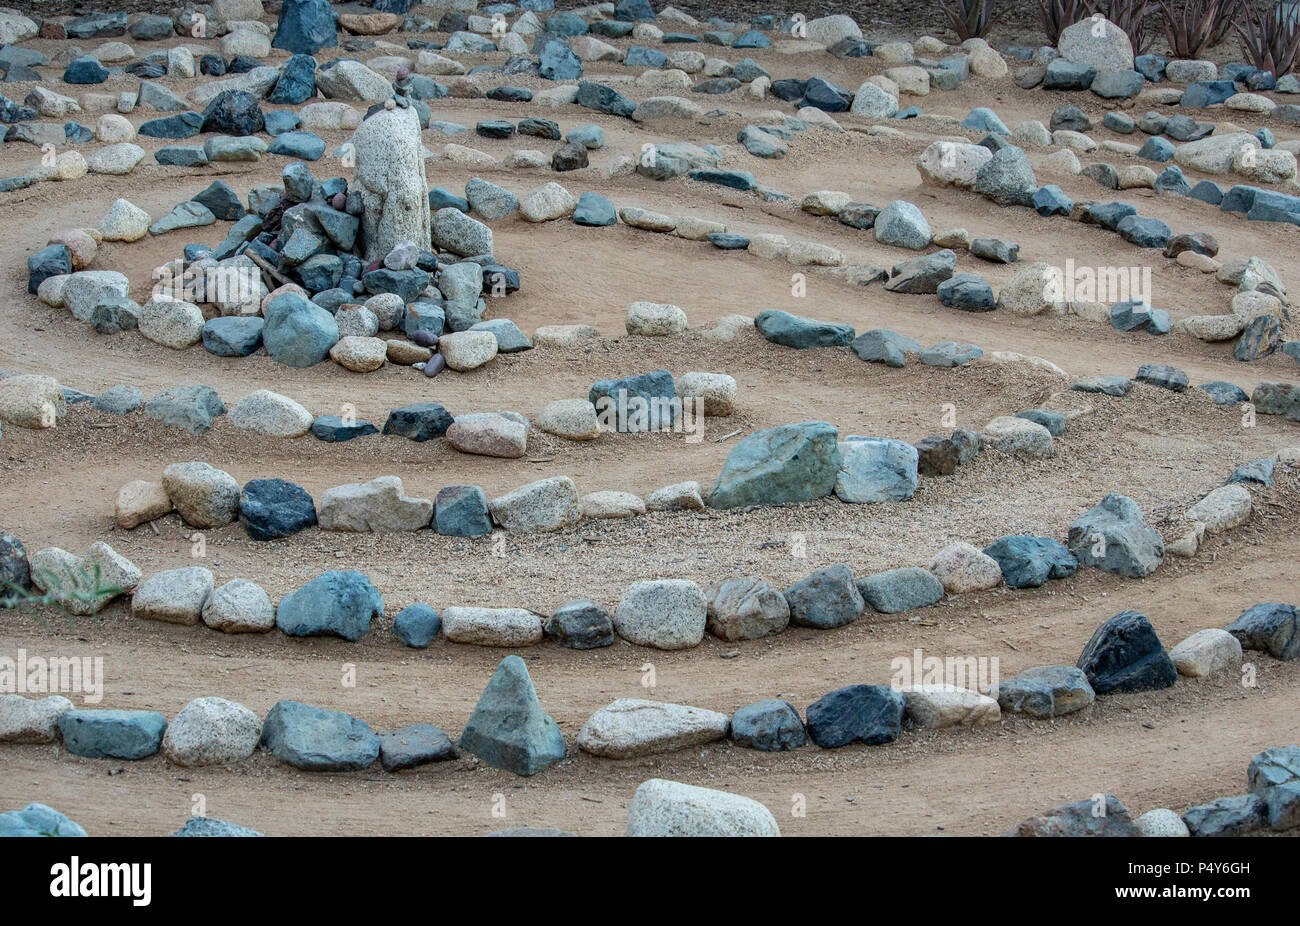 Traditional natural stone walking labyrinth mazze for contemplation and worship, created with rocks in shades of blue and turquoise. A calm, peaceful Stock Photo